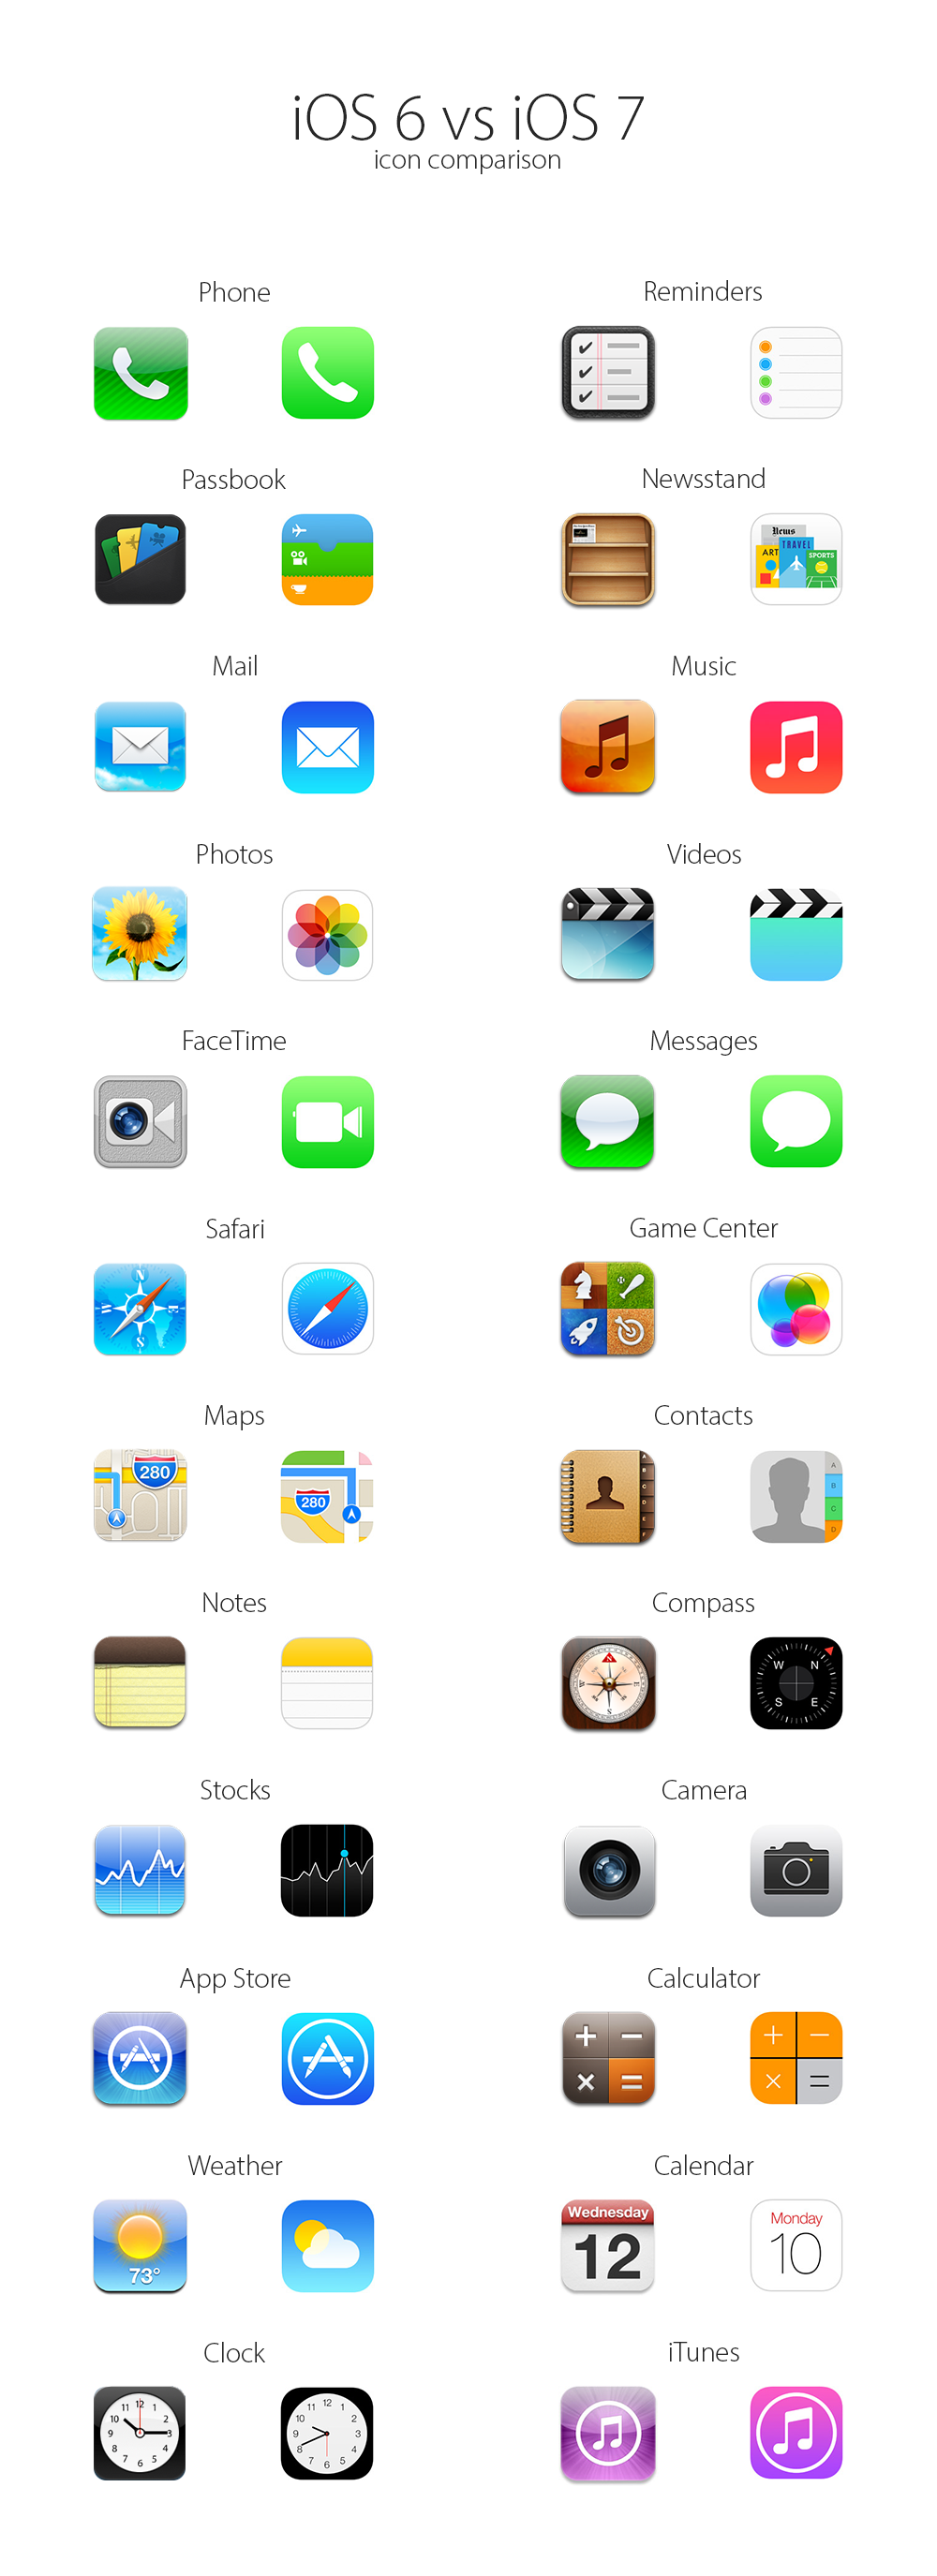 Apple Used Marketing Department for iOS 7 Icon Designs?